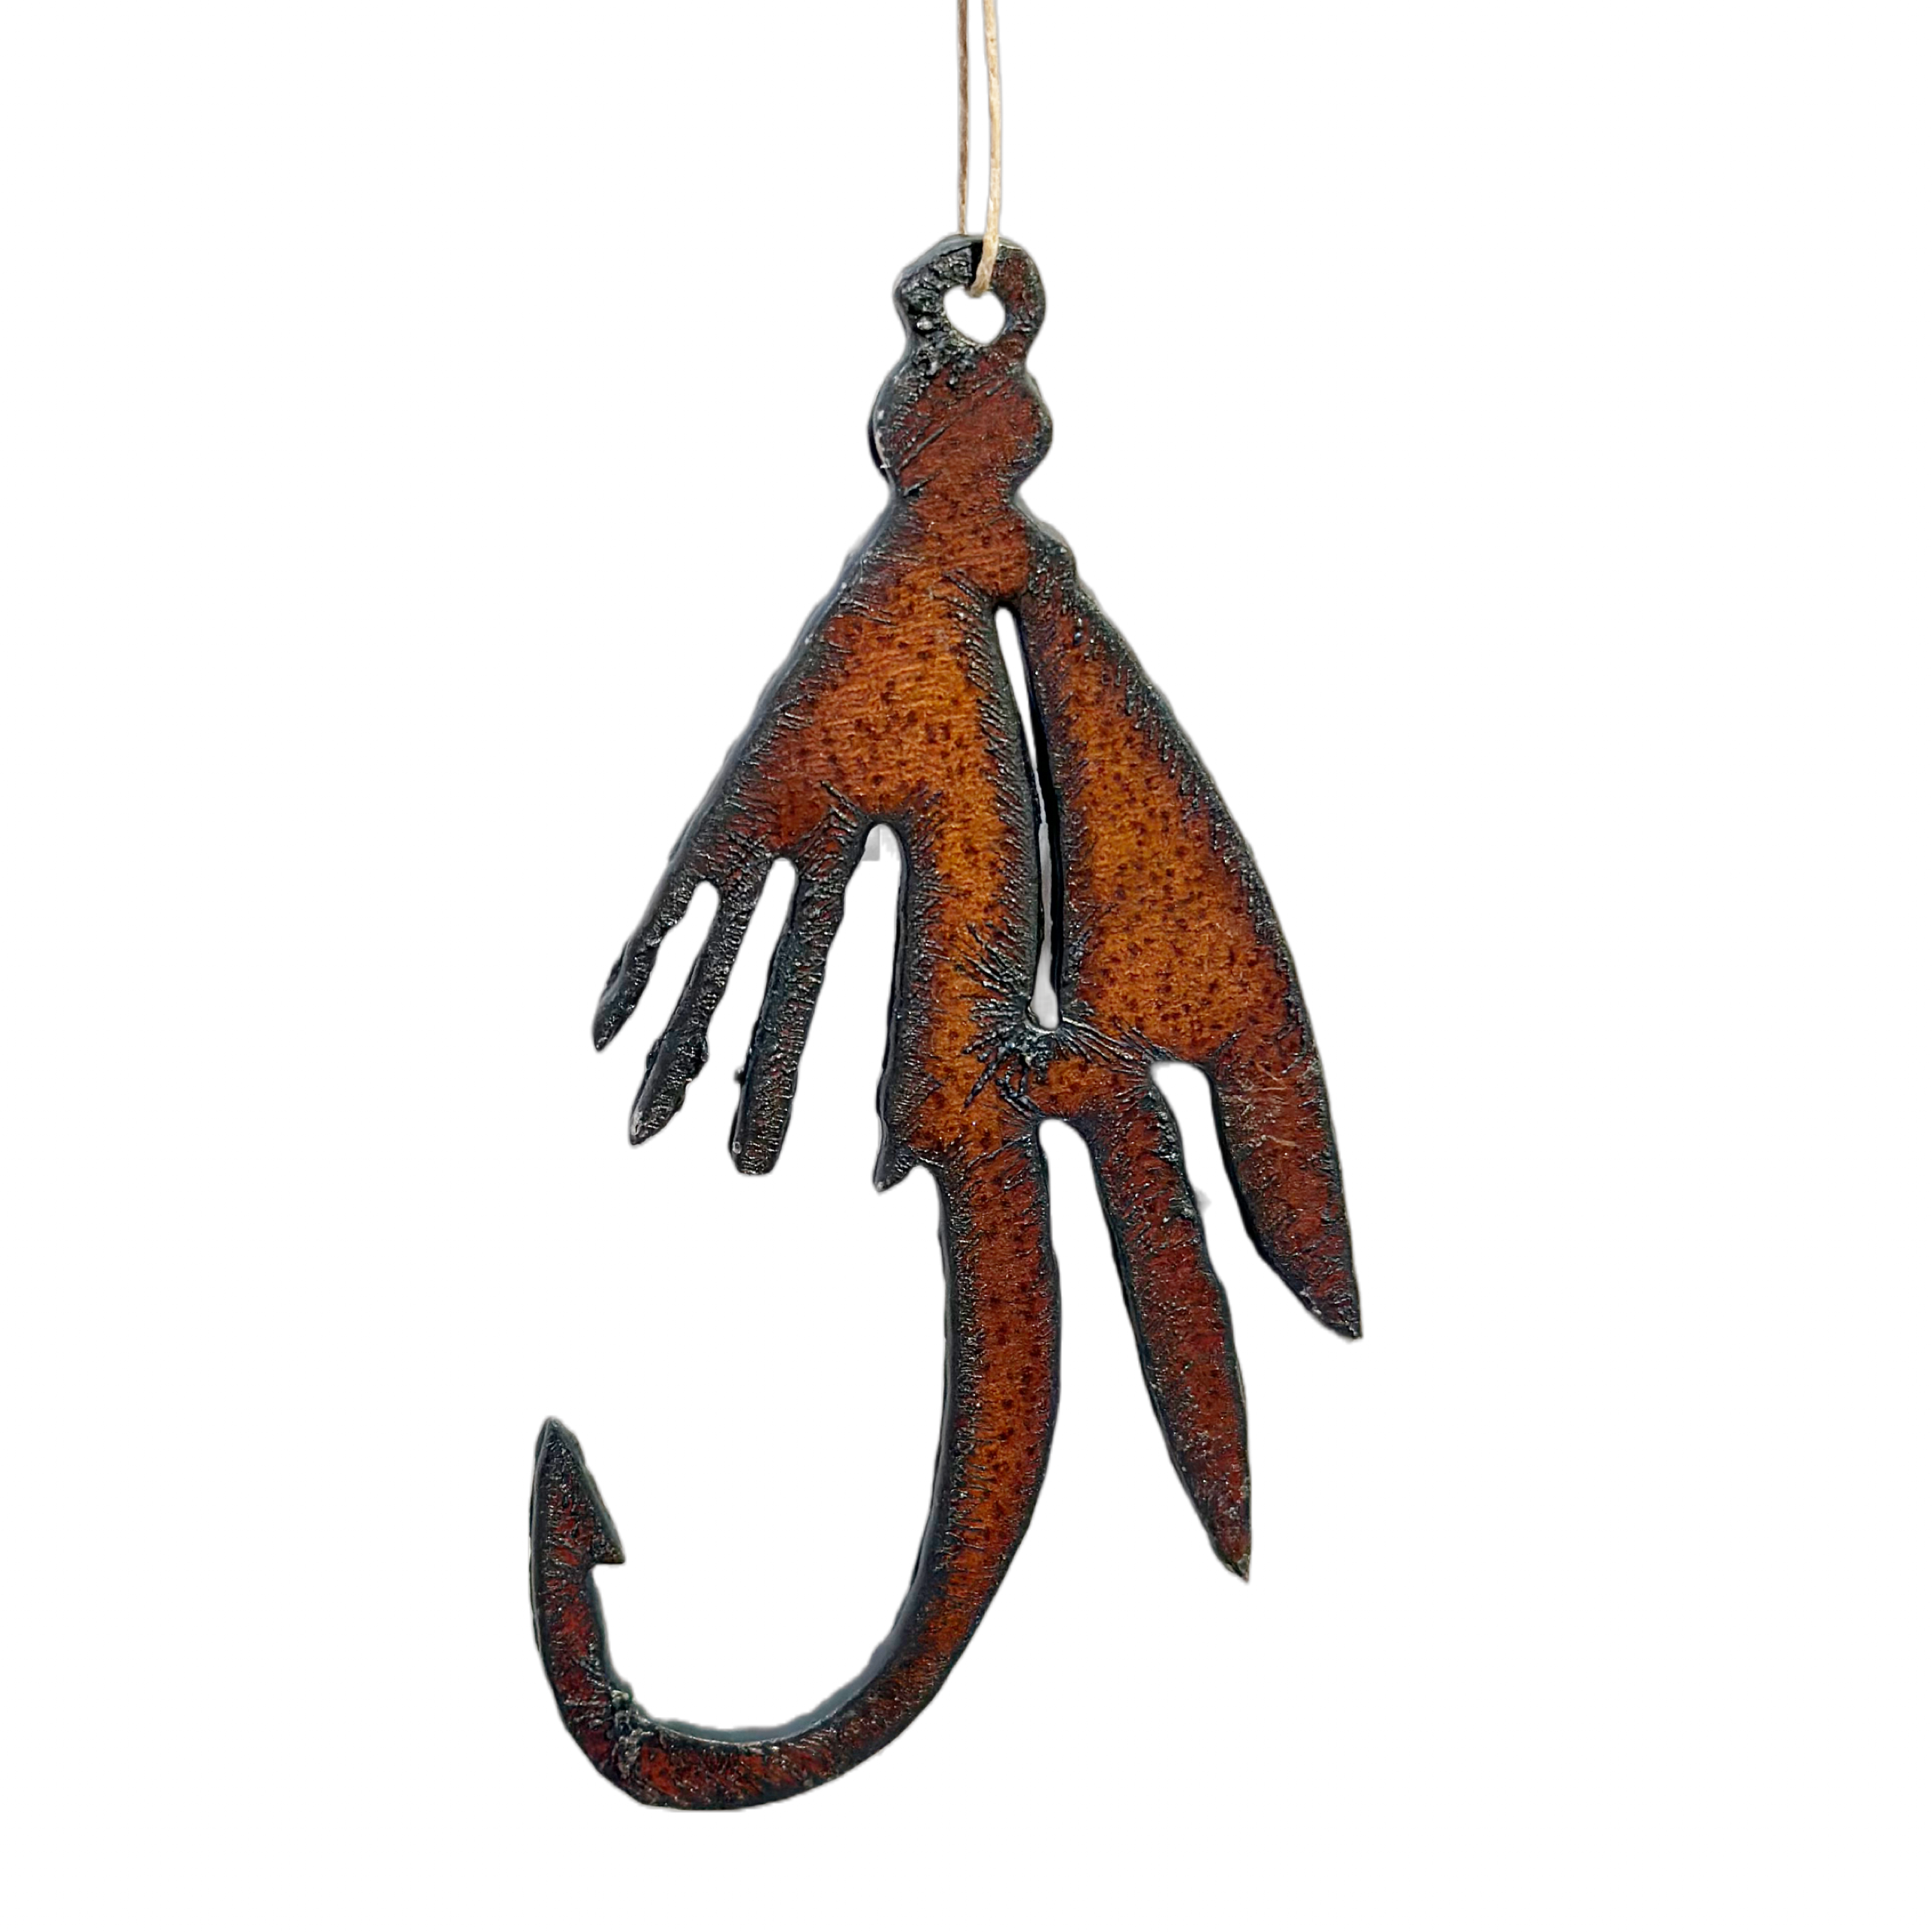 Rusted Rustic Ornament